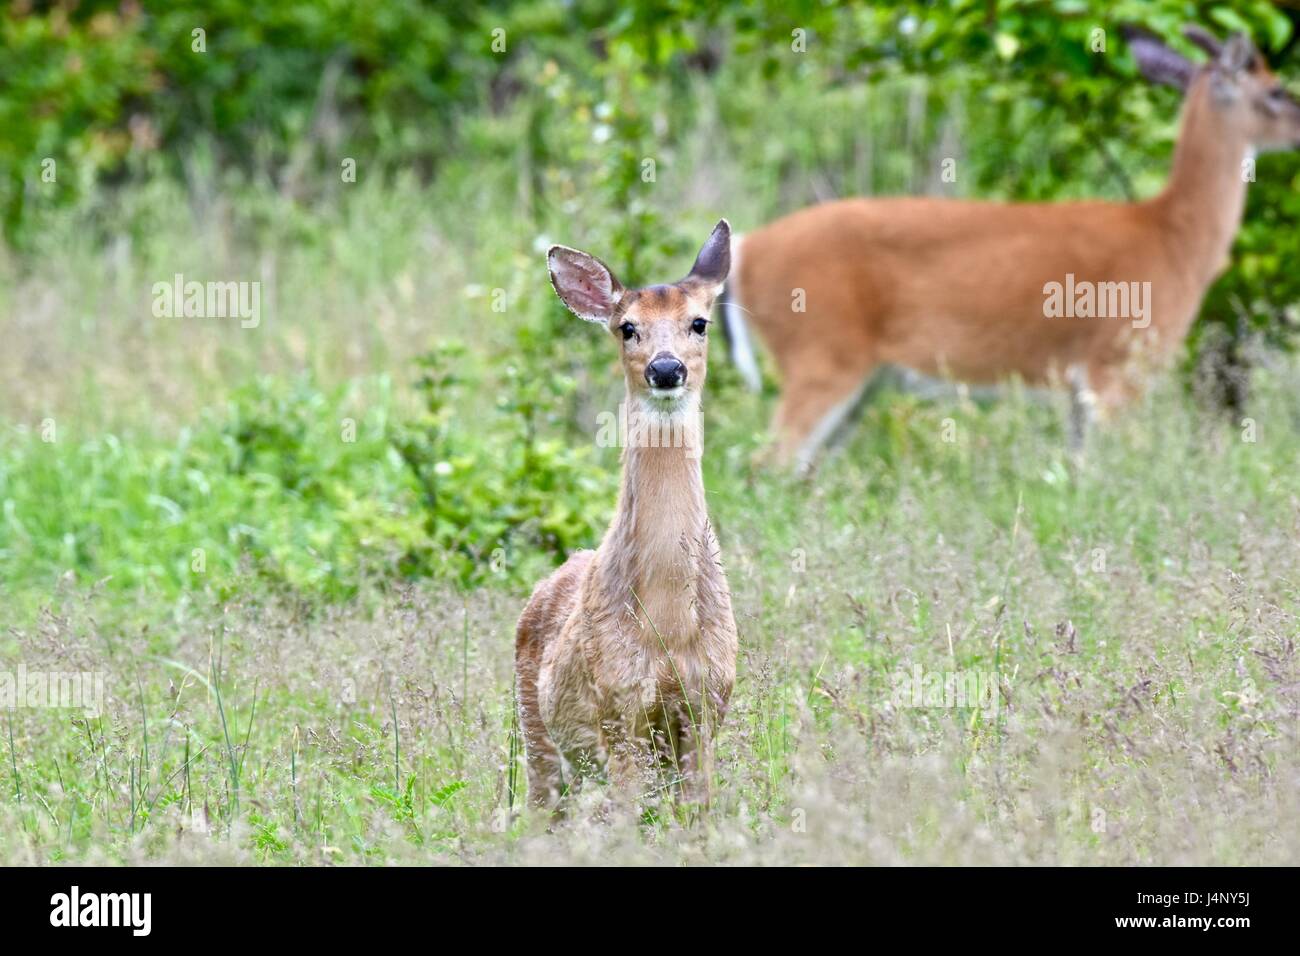 White-tailed deer (Odocoileus virginianus) or whitetail doe standing in a grass field Stock Photo